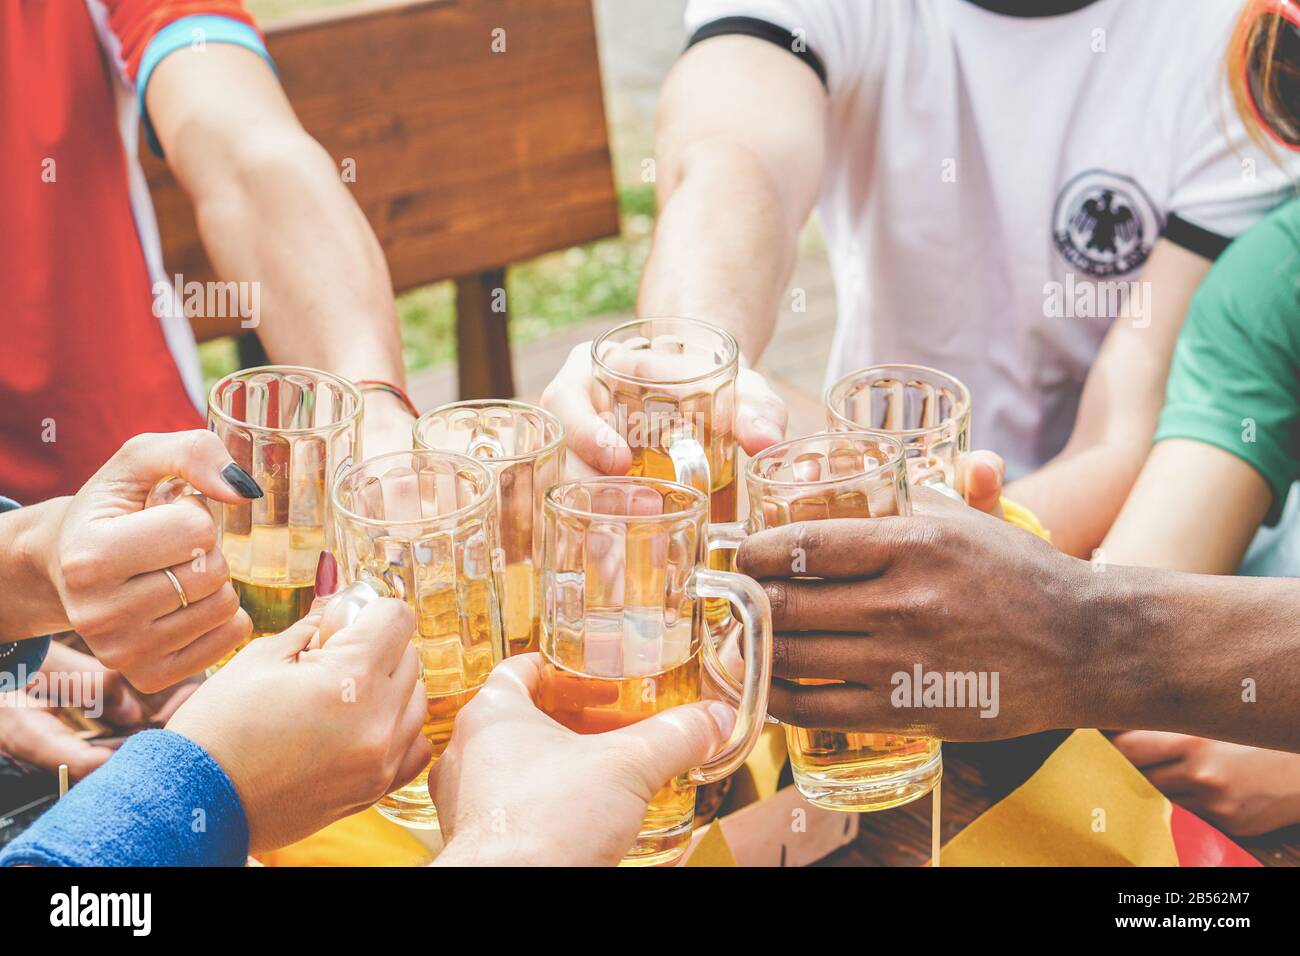 Multination football supporters cheering with beers in pub outdoor before soccer match - Happy sport fans having fun together drinking together - Bond Stock Photo